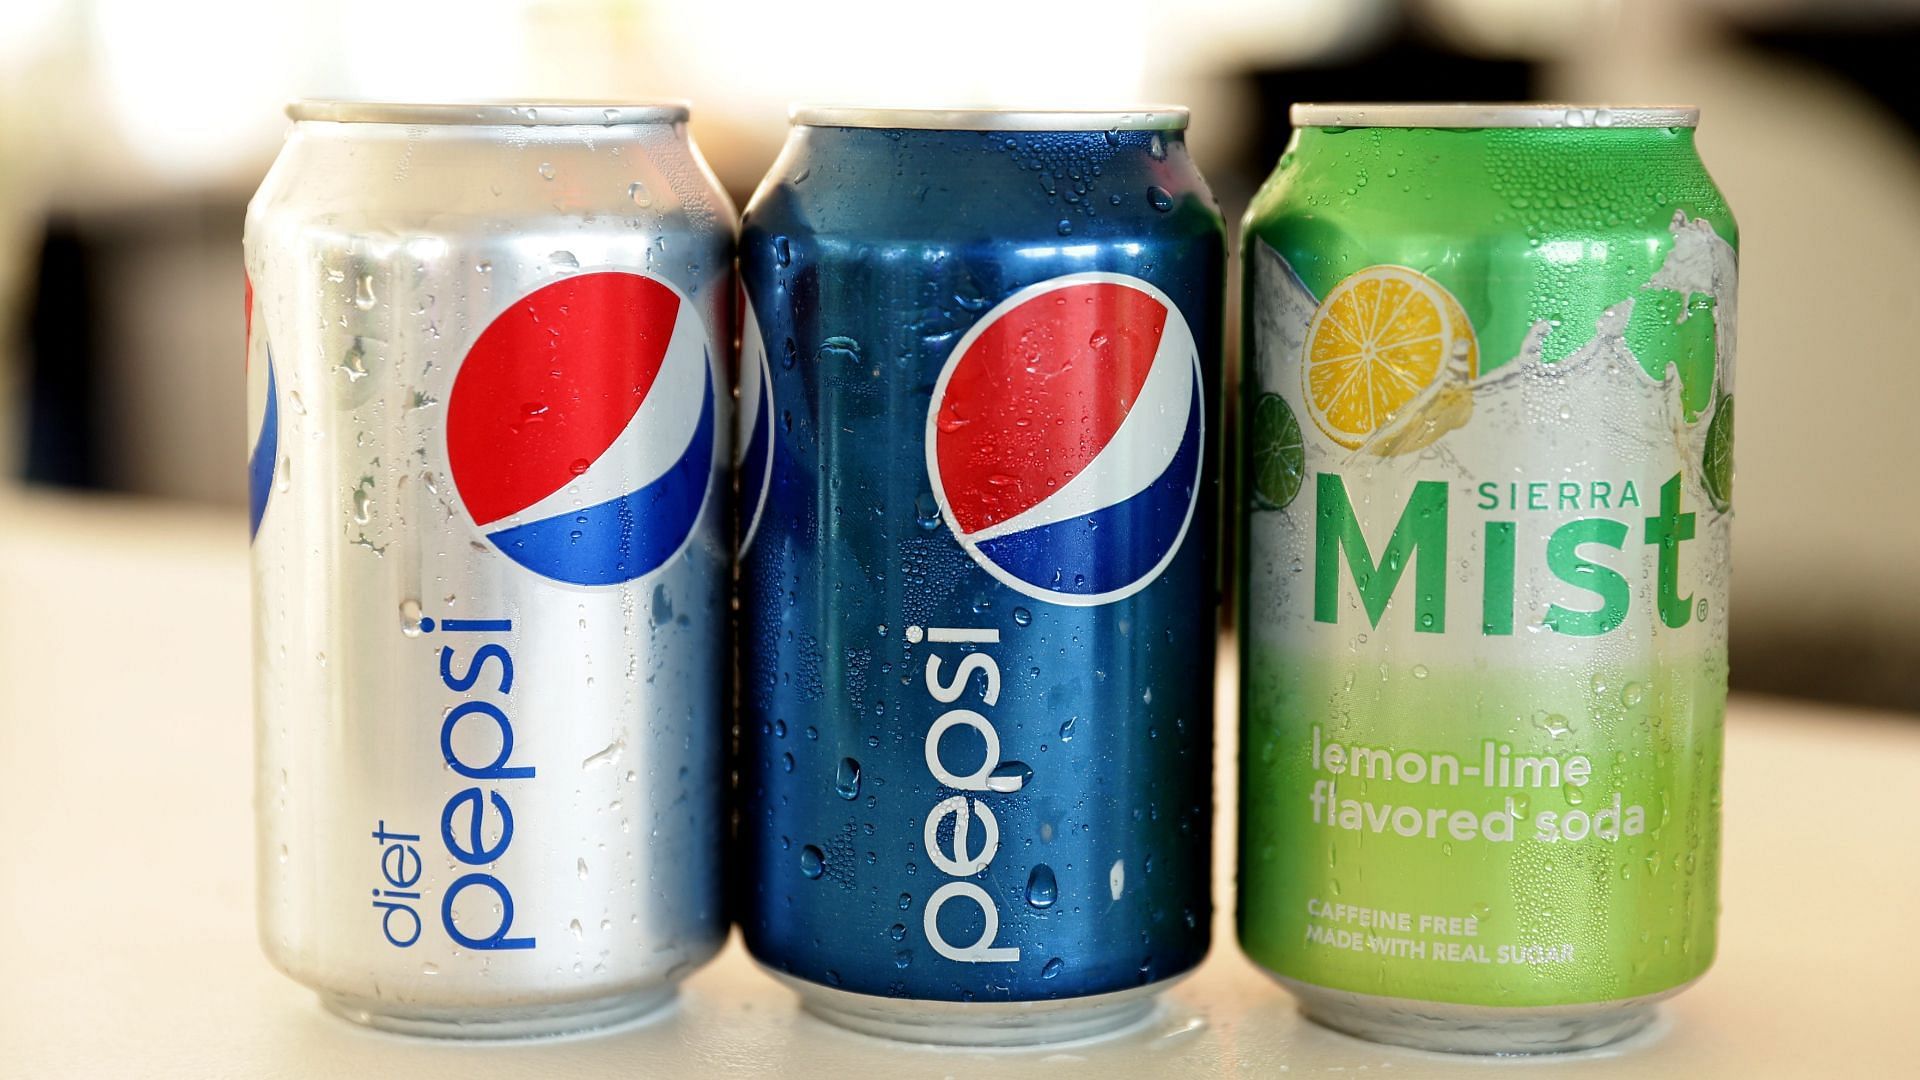 Pepsi discontinues Sierra Mist over continuos failure (Image via Neilson Barnard/Getty Images)